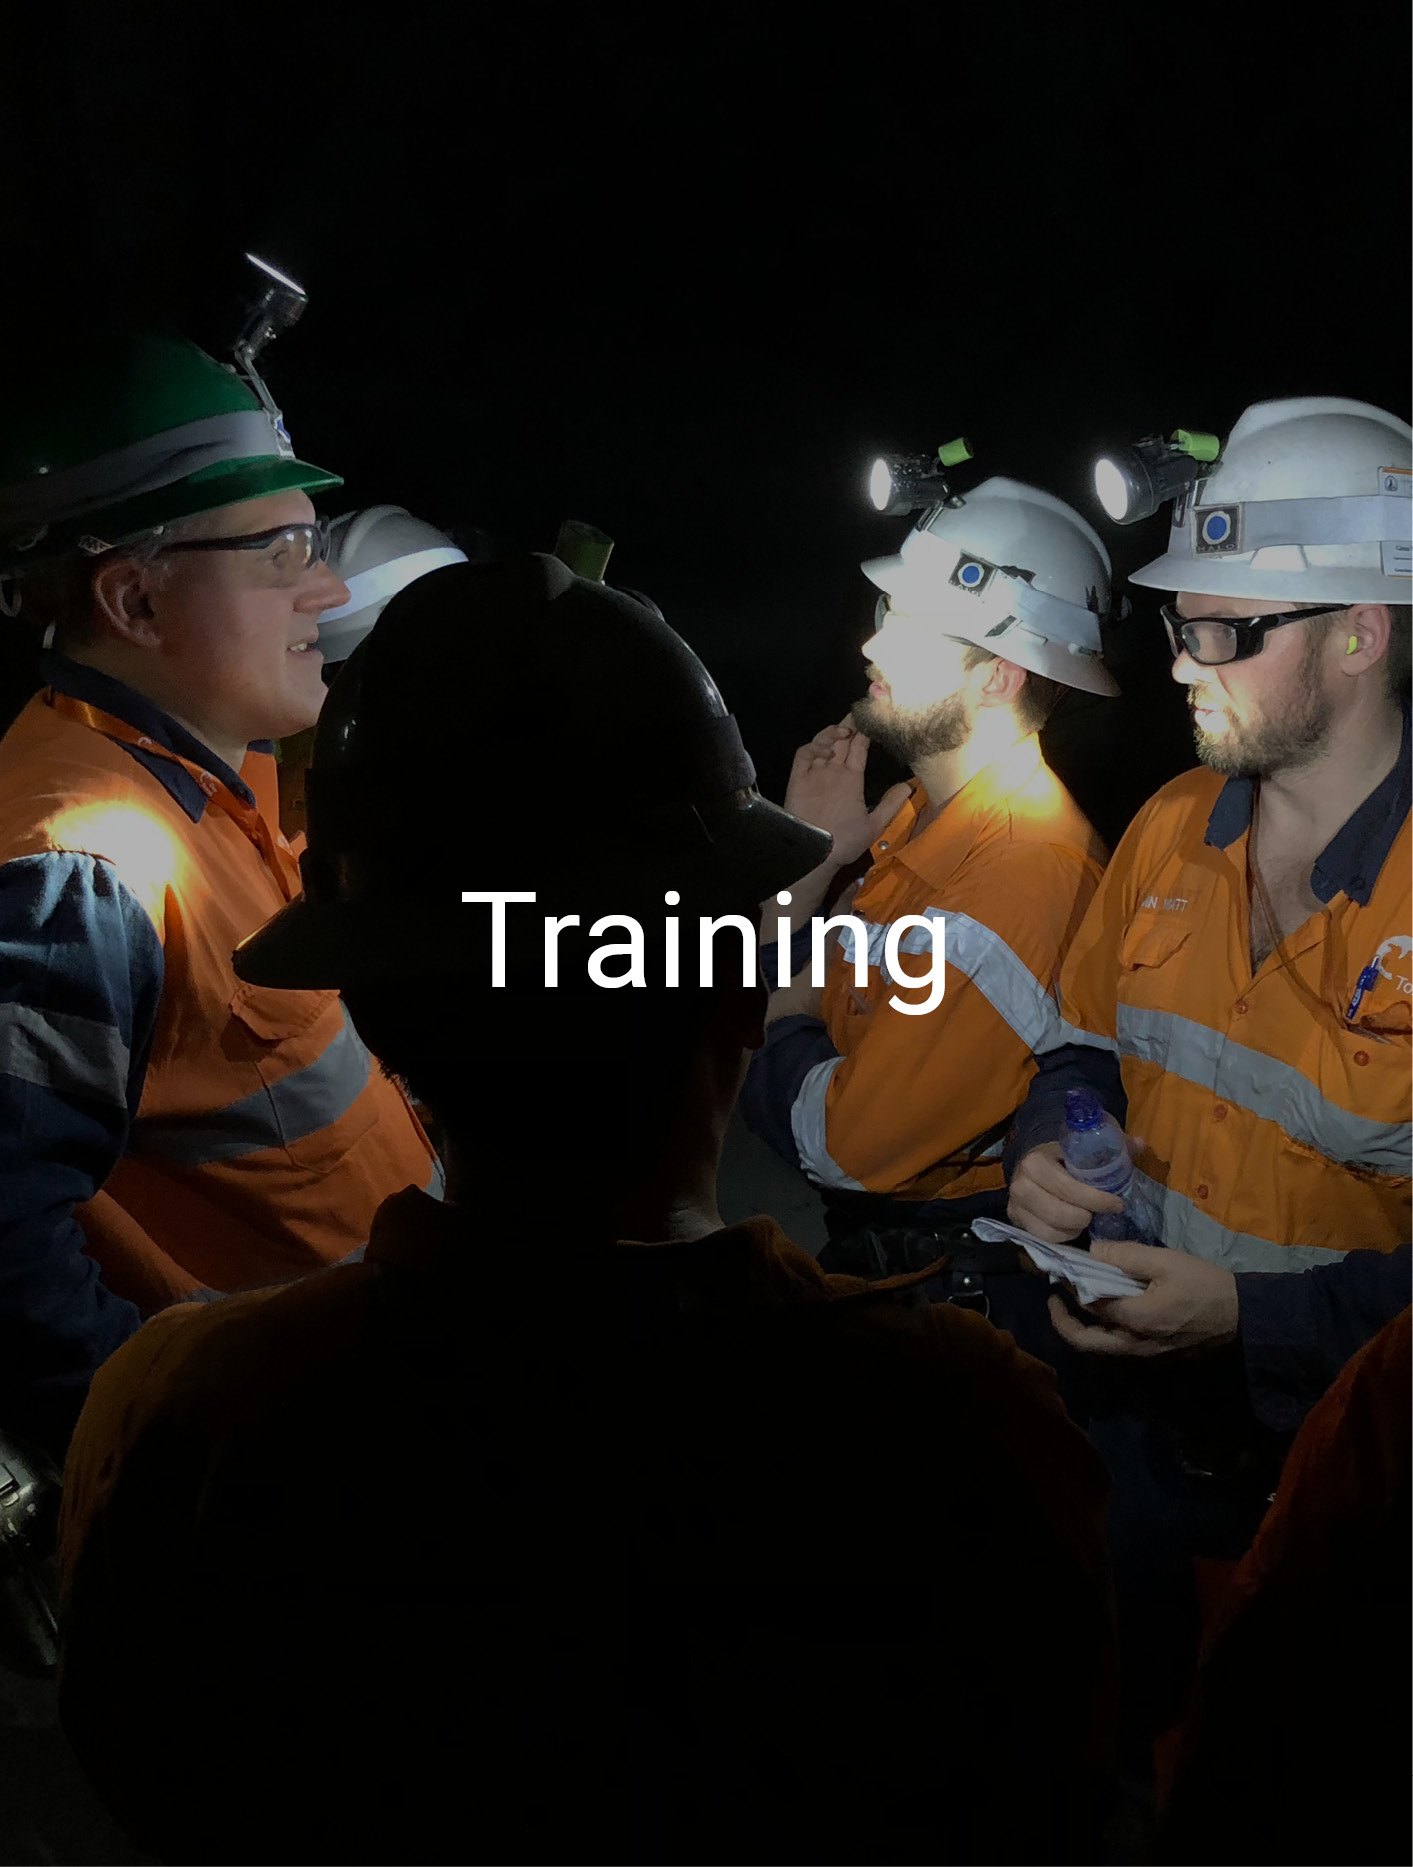 text 'Training' over background of workers in PPE